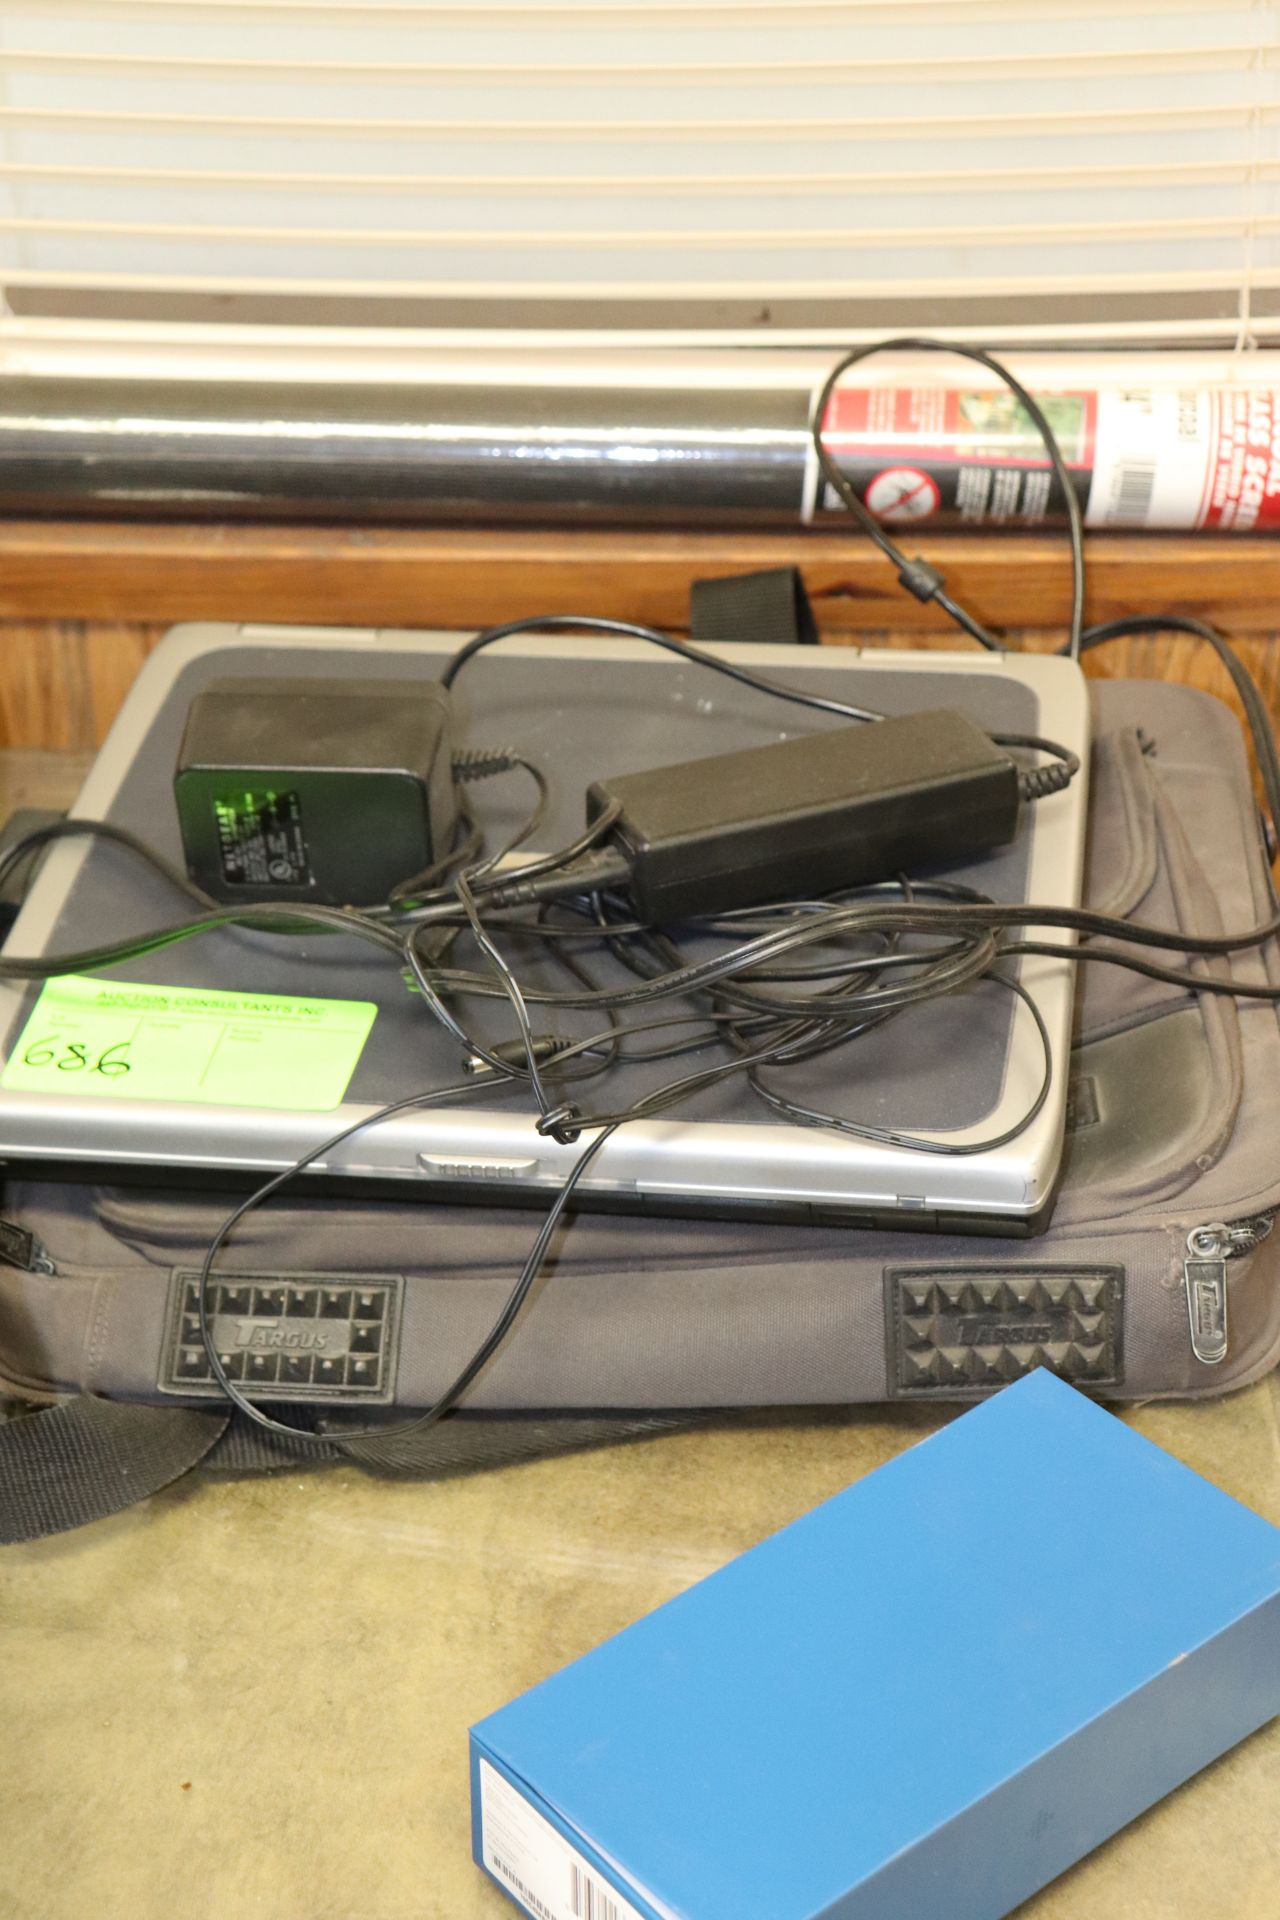 HP laptop with case